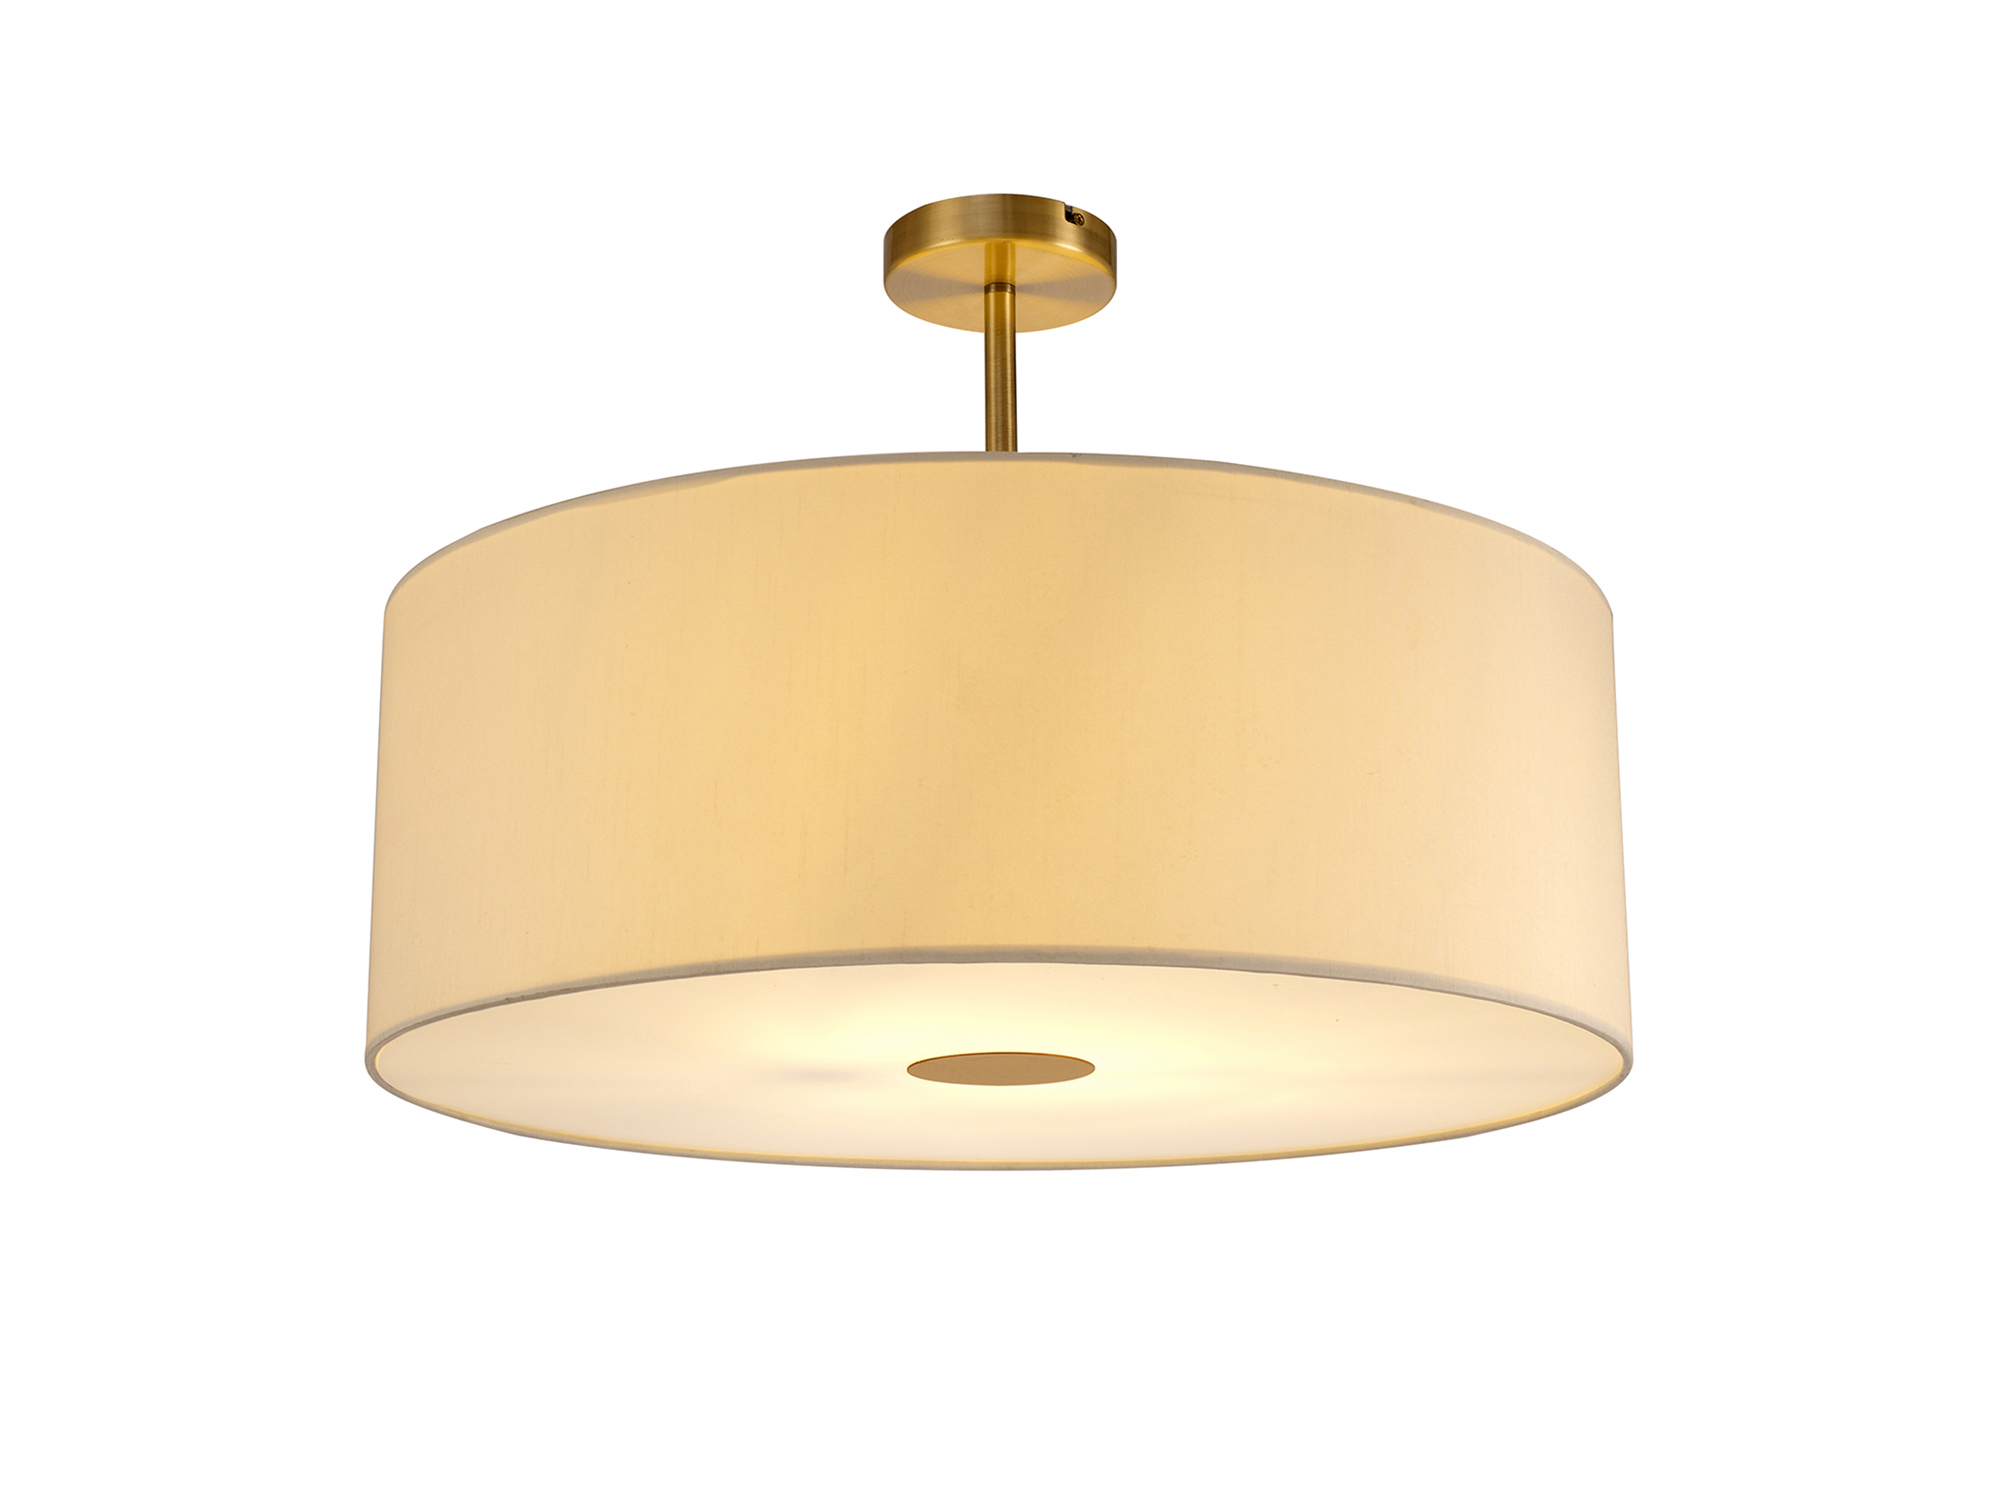 DK0191  Baymont 60cm Semi Flush 1 Light Antique Brass, Ivory Pearl, Frosted Diffuser